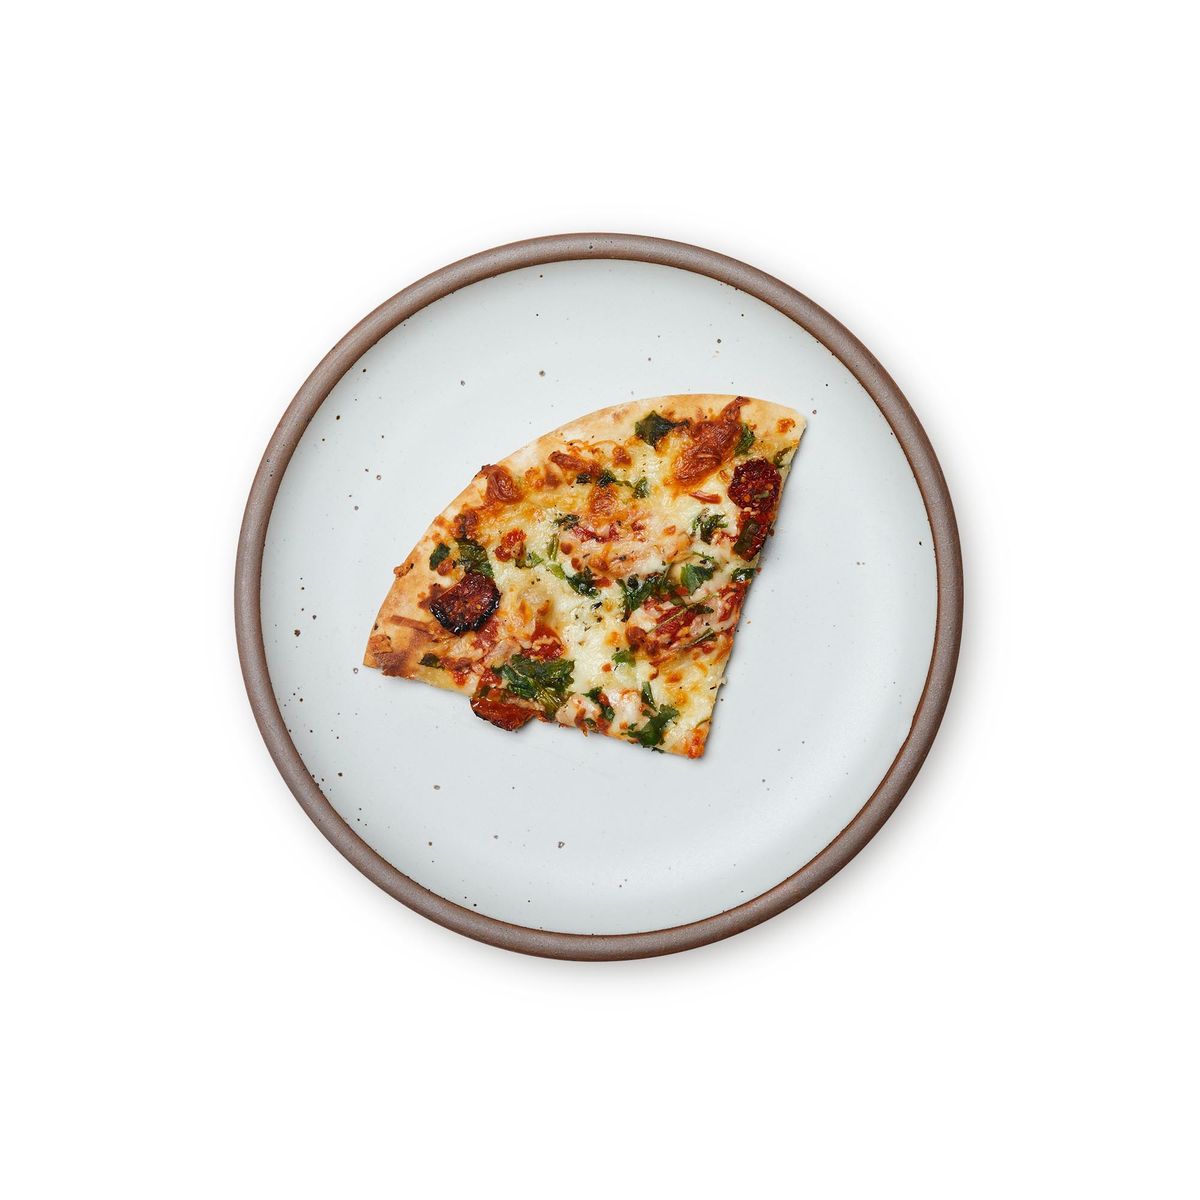 A slice of pizza on a dinner sized ceramic plate in a cool white color featuring iron speckles and an unglazed rim.